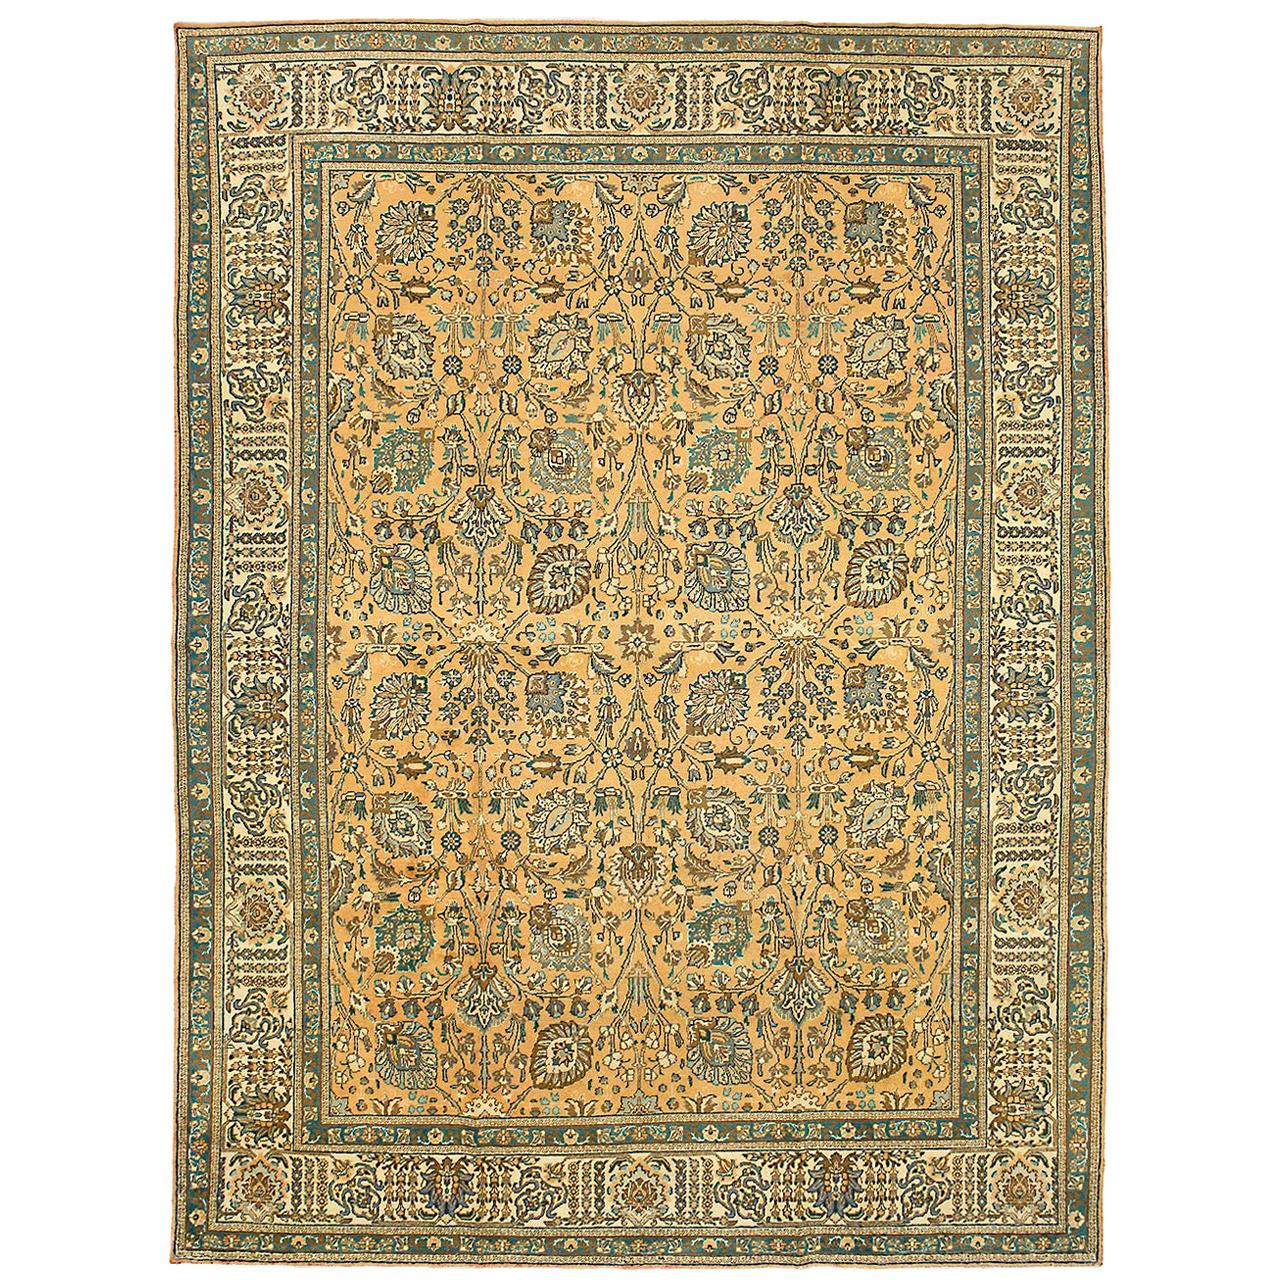 20th Century Antique Persian Tabriz Rug with Brown & Blue All-Over Floral Detail